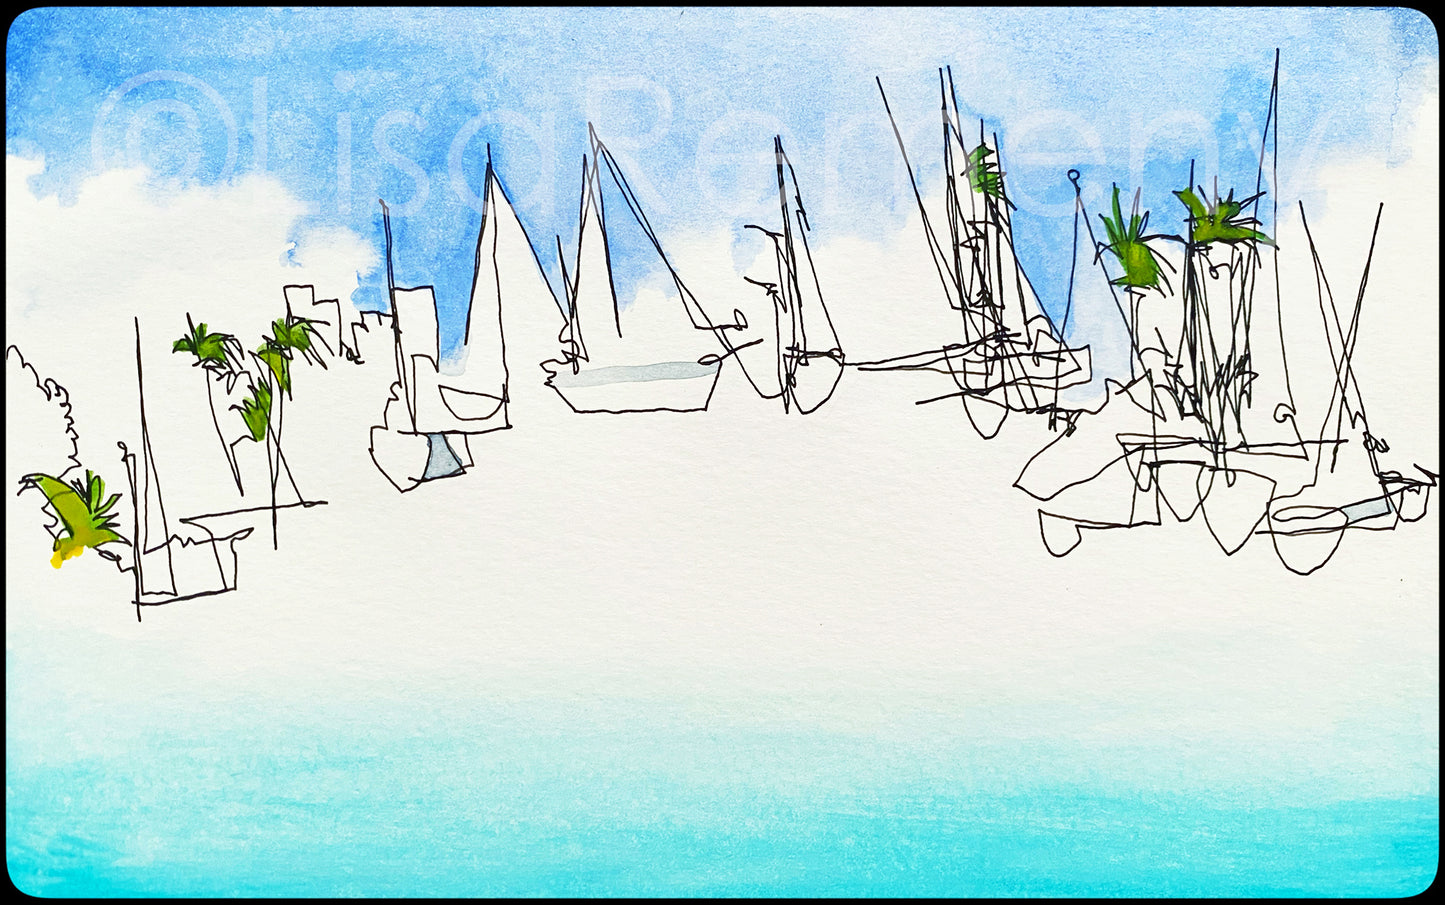 Watercolor + Ink on Paper - The Anchorage, Coconut Grove, Florida